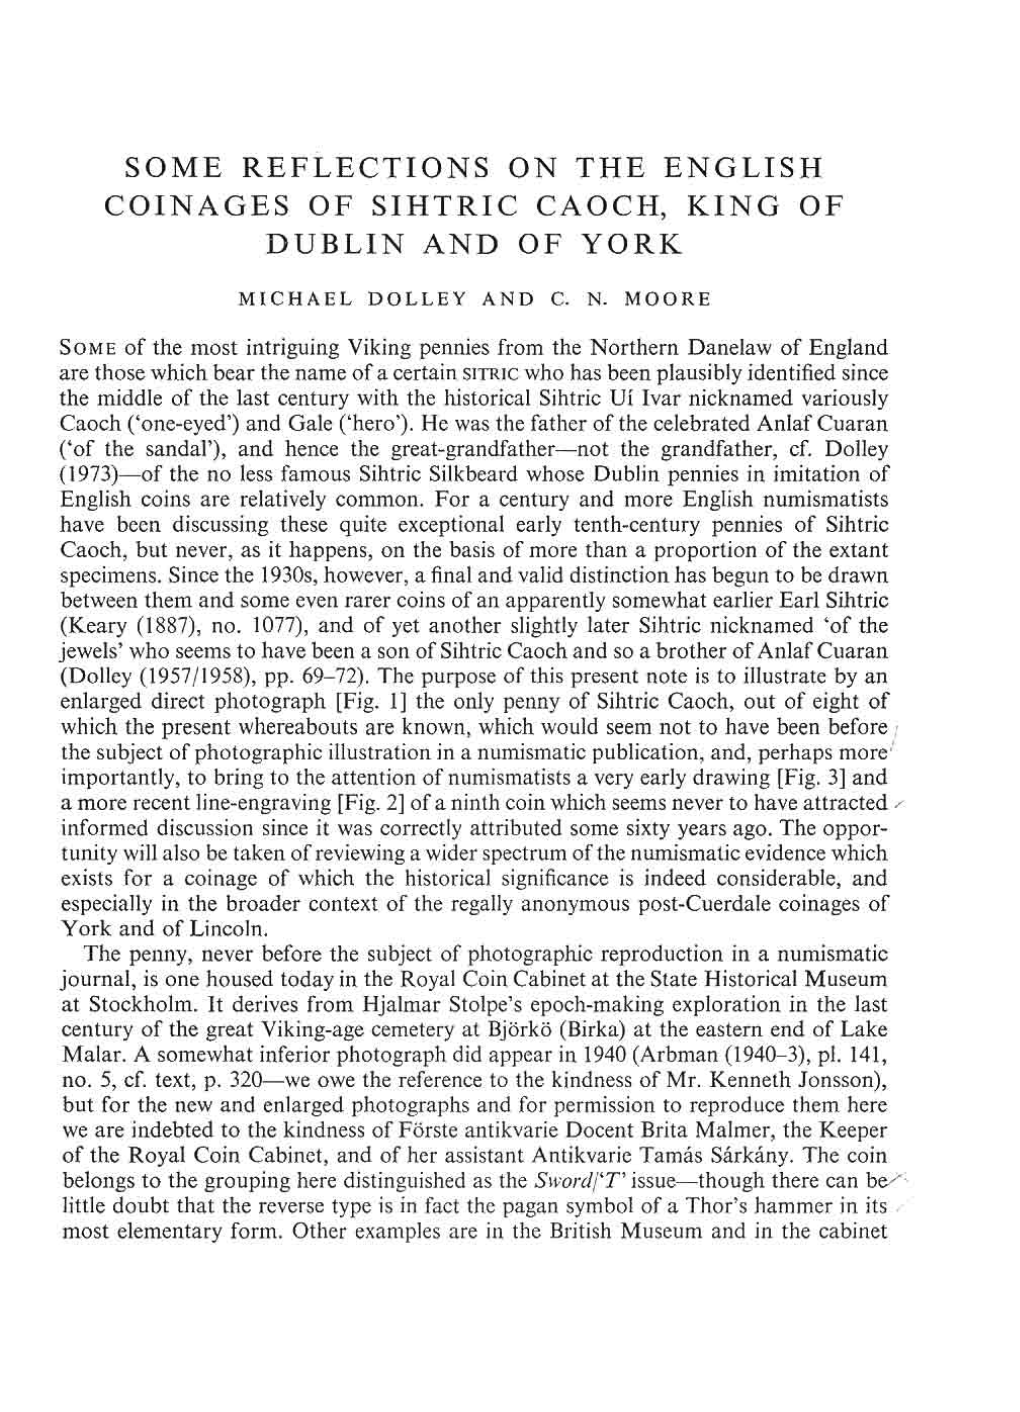 Some Reflections on the English Coinages of Sihtric Caoch, King of Dublin and of York